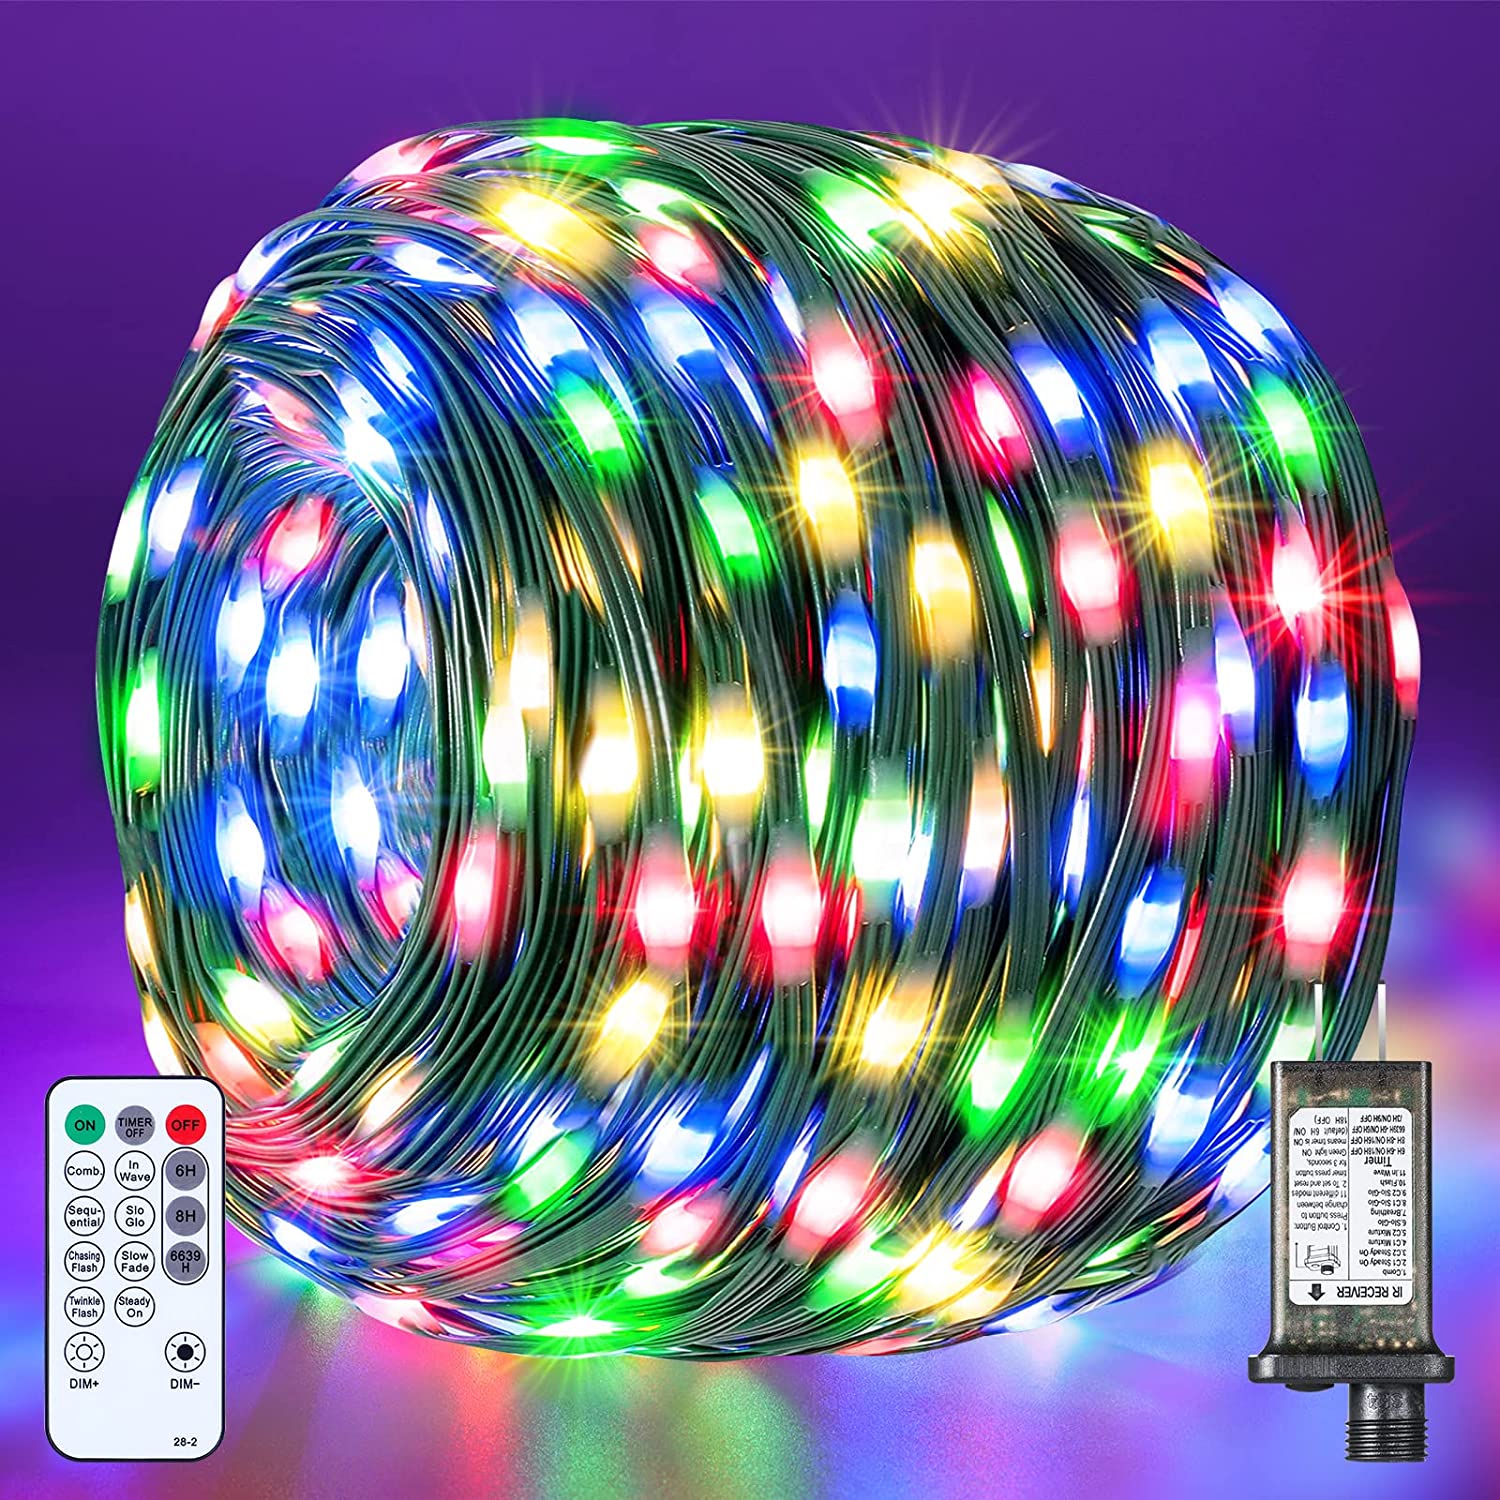 Marchpower Christmas Lights Outdoor, 164FT 1000LED IP65 Waterproof LED Rope Light with with Remote & Timer Function, 4 Brightness 8 Modes Plug in Outside String Light for Garden Holiday – Multicolor